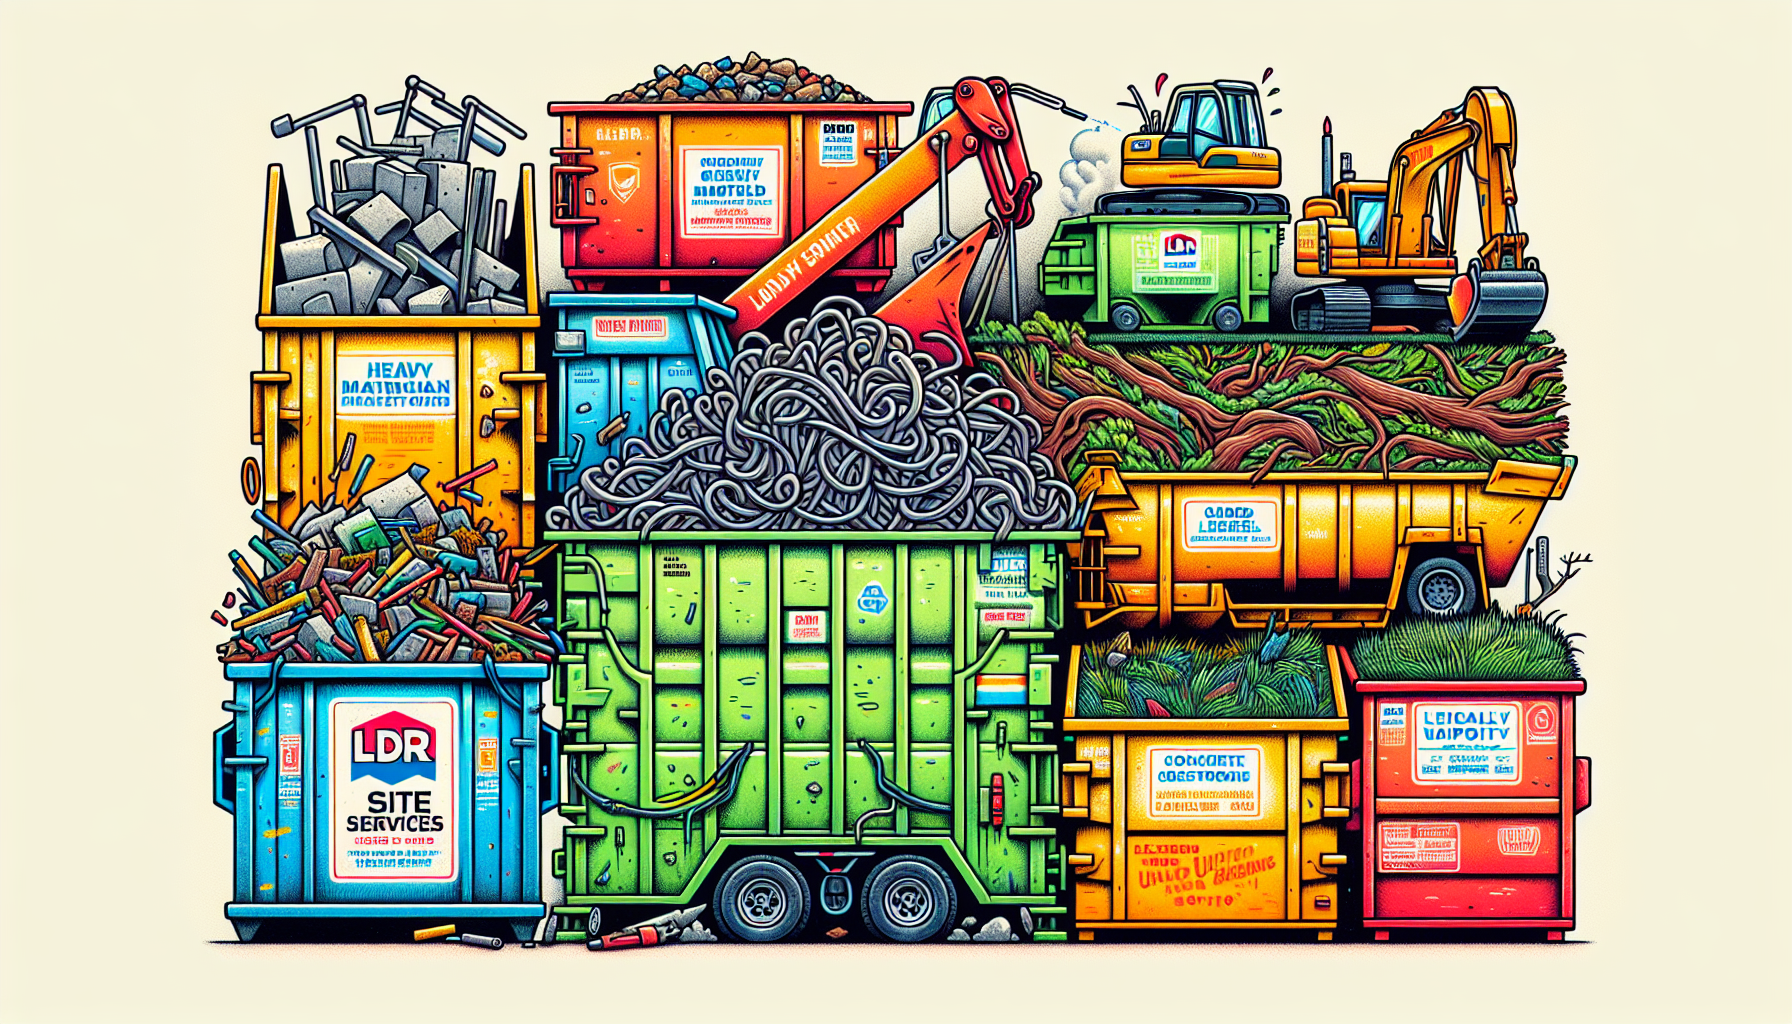 Specialty dumpsters for heavy materials and yard waste